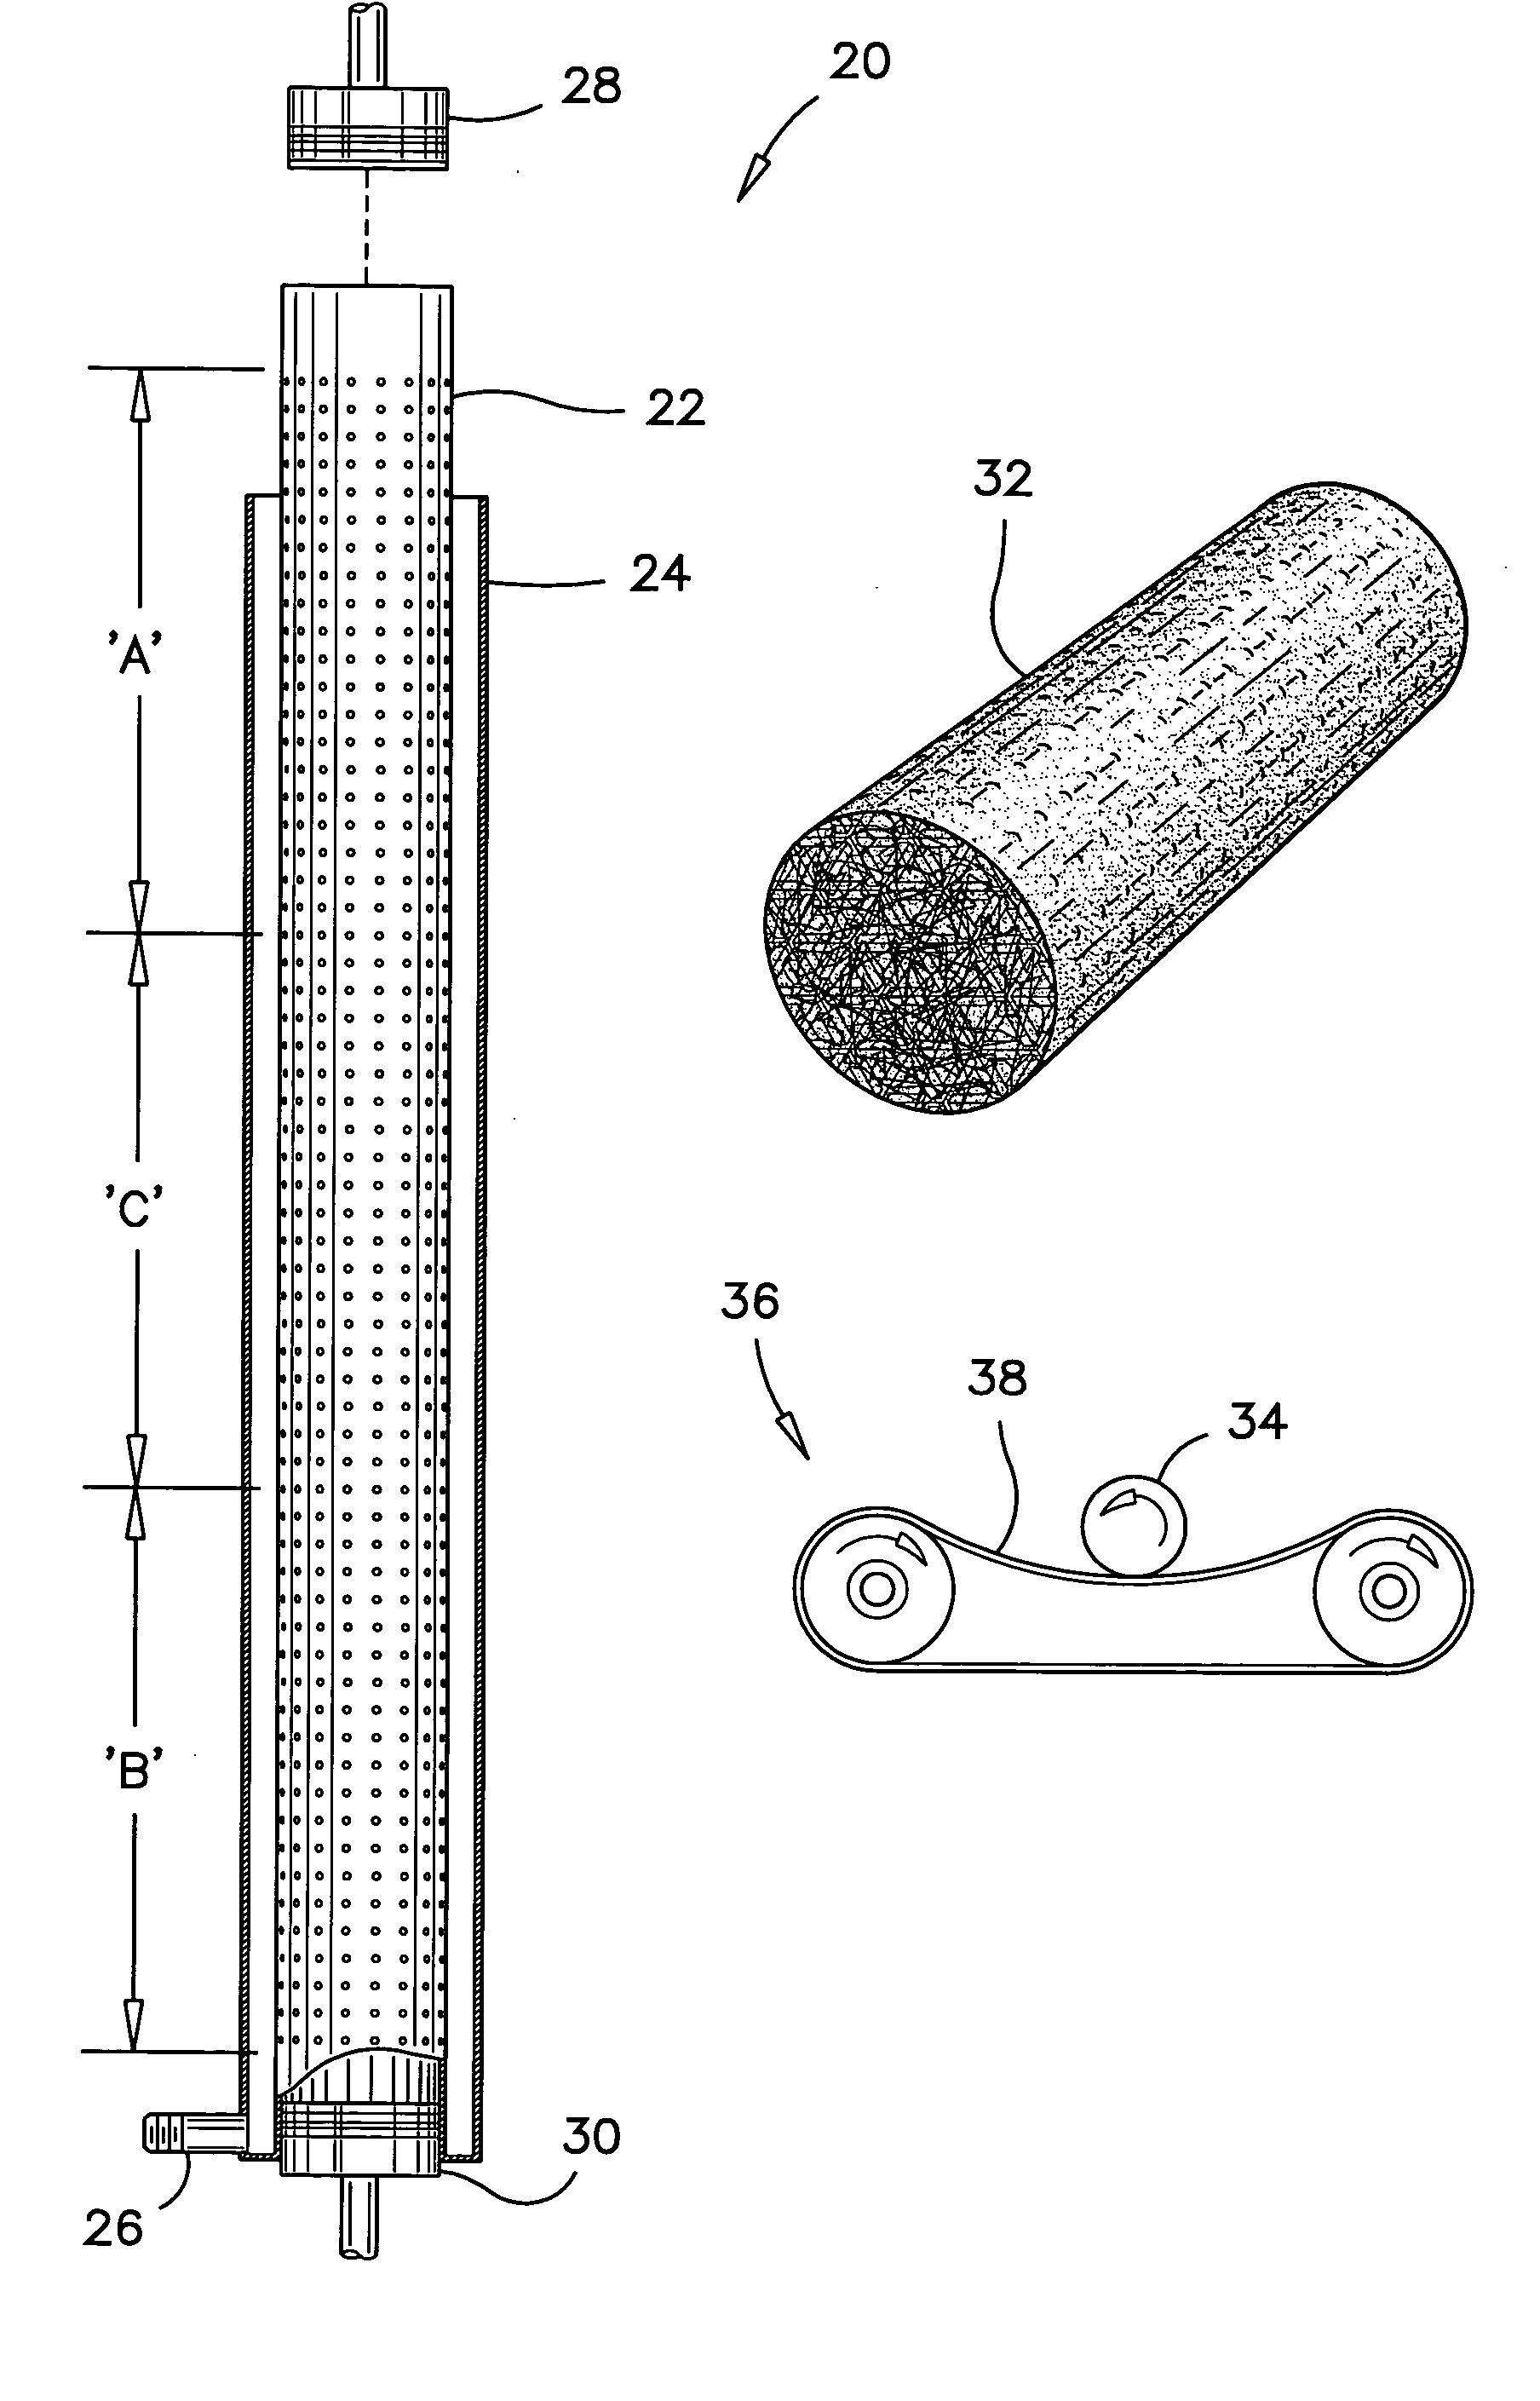 Fire log made of recycled materials and a method and an apparatus for manufacturing the same